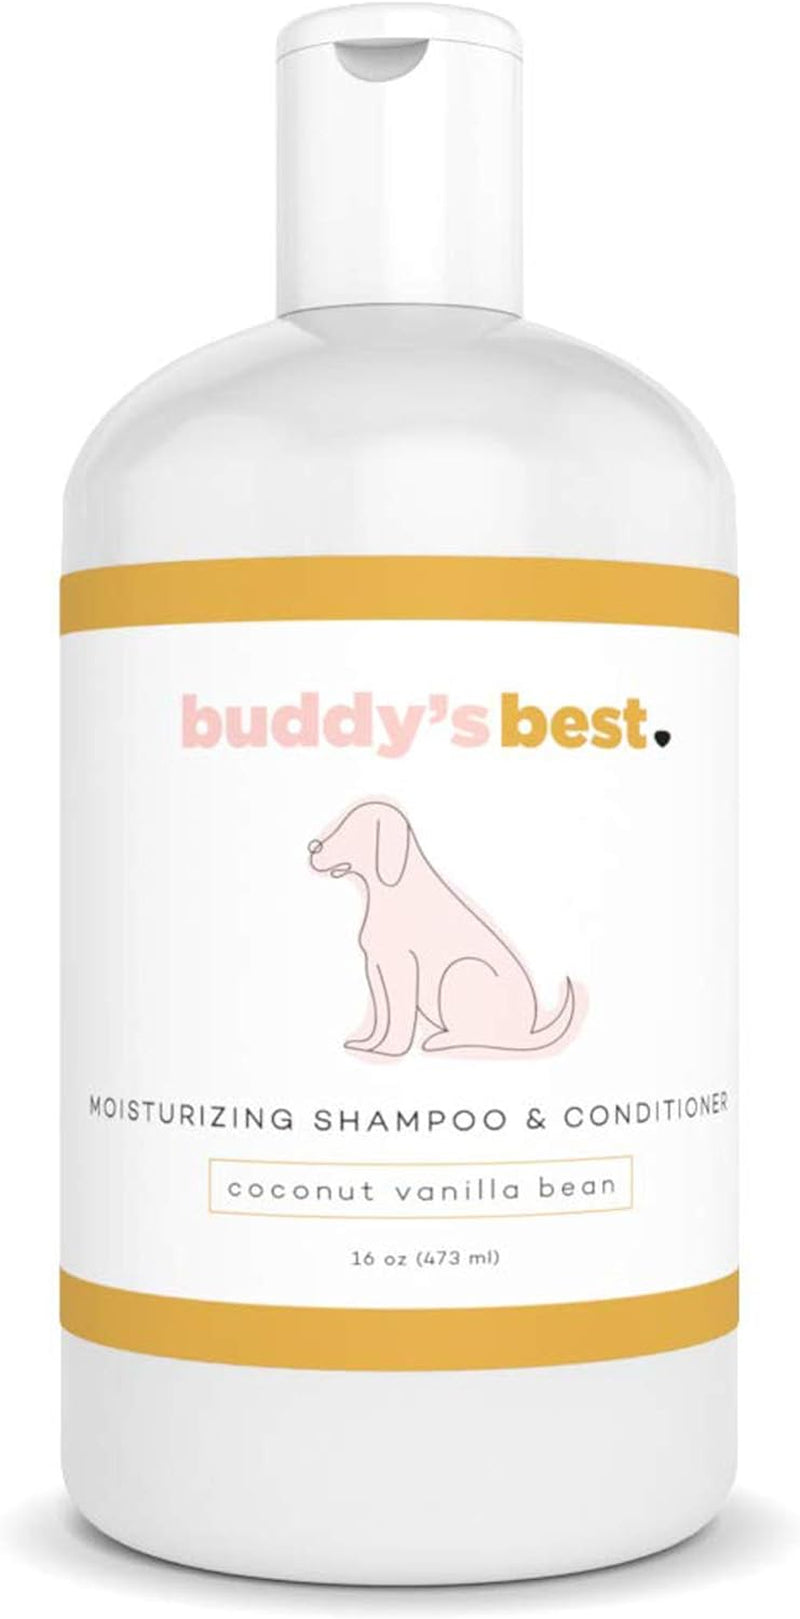 Dog Shampoo for Smelly Dogs - Skin-Friendly, Oatmeal Dog Shampoo and Conditioner for Dry and Sensitive Skin - Moisturizing Puppy Wash Shampoo, Calming Lavender Scent, 16Oz